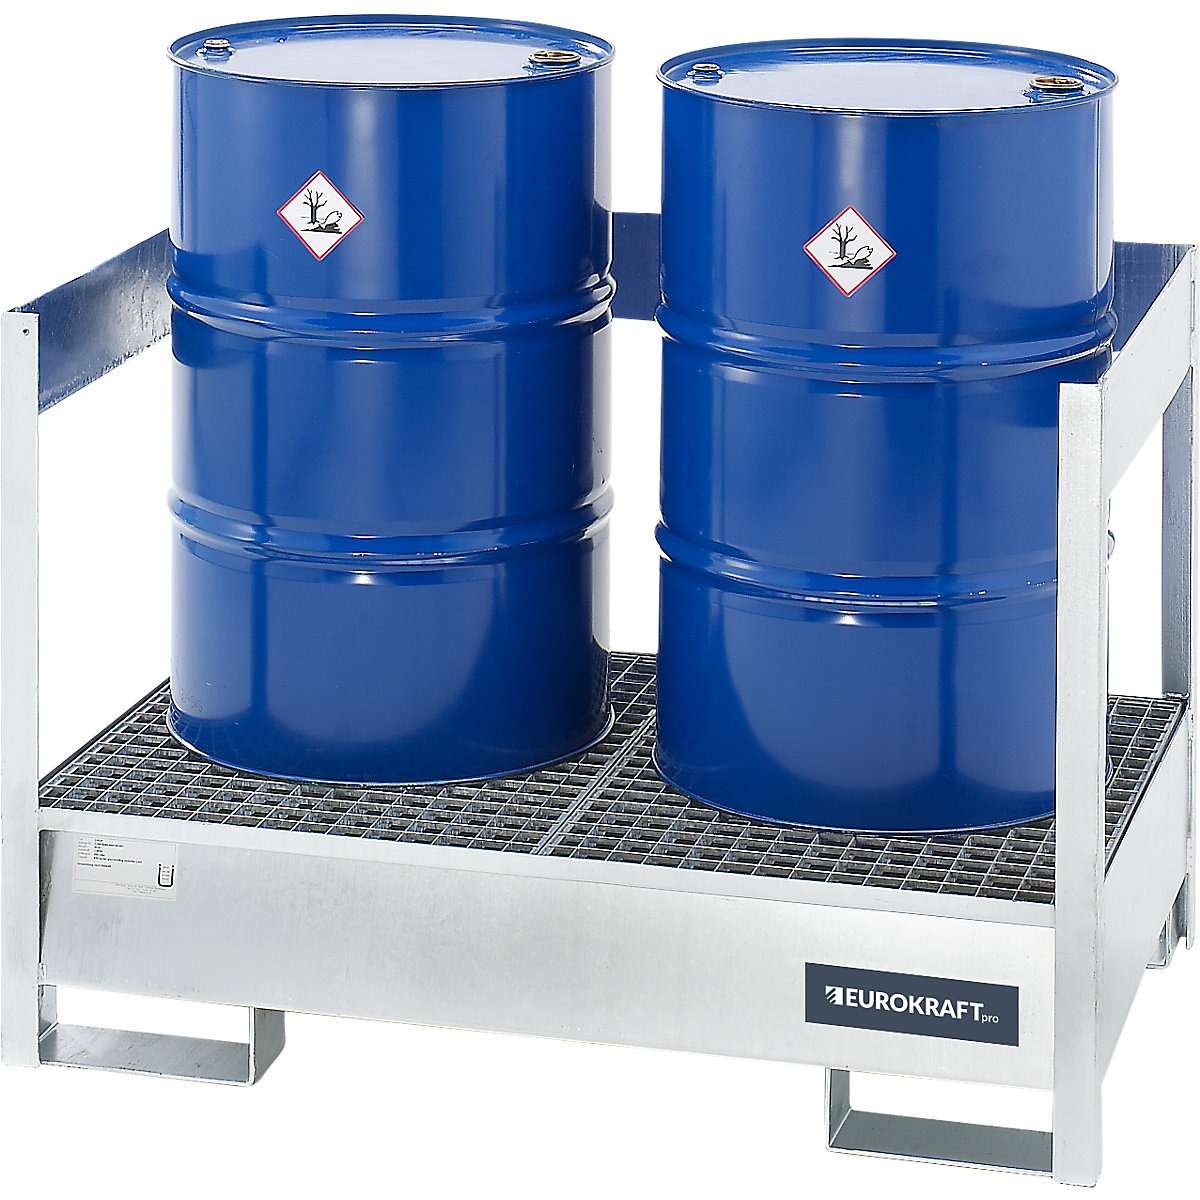 Drum sump tray for transport and storage – eurokraft pro, closed rear and side walls, stackable, for 2 drums, blue-6